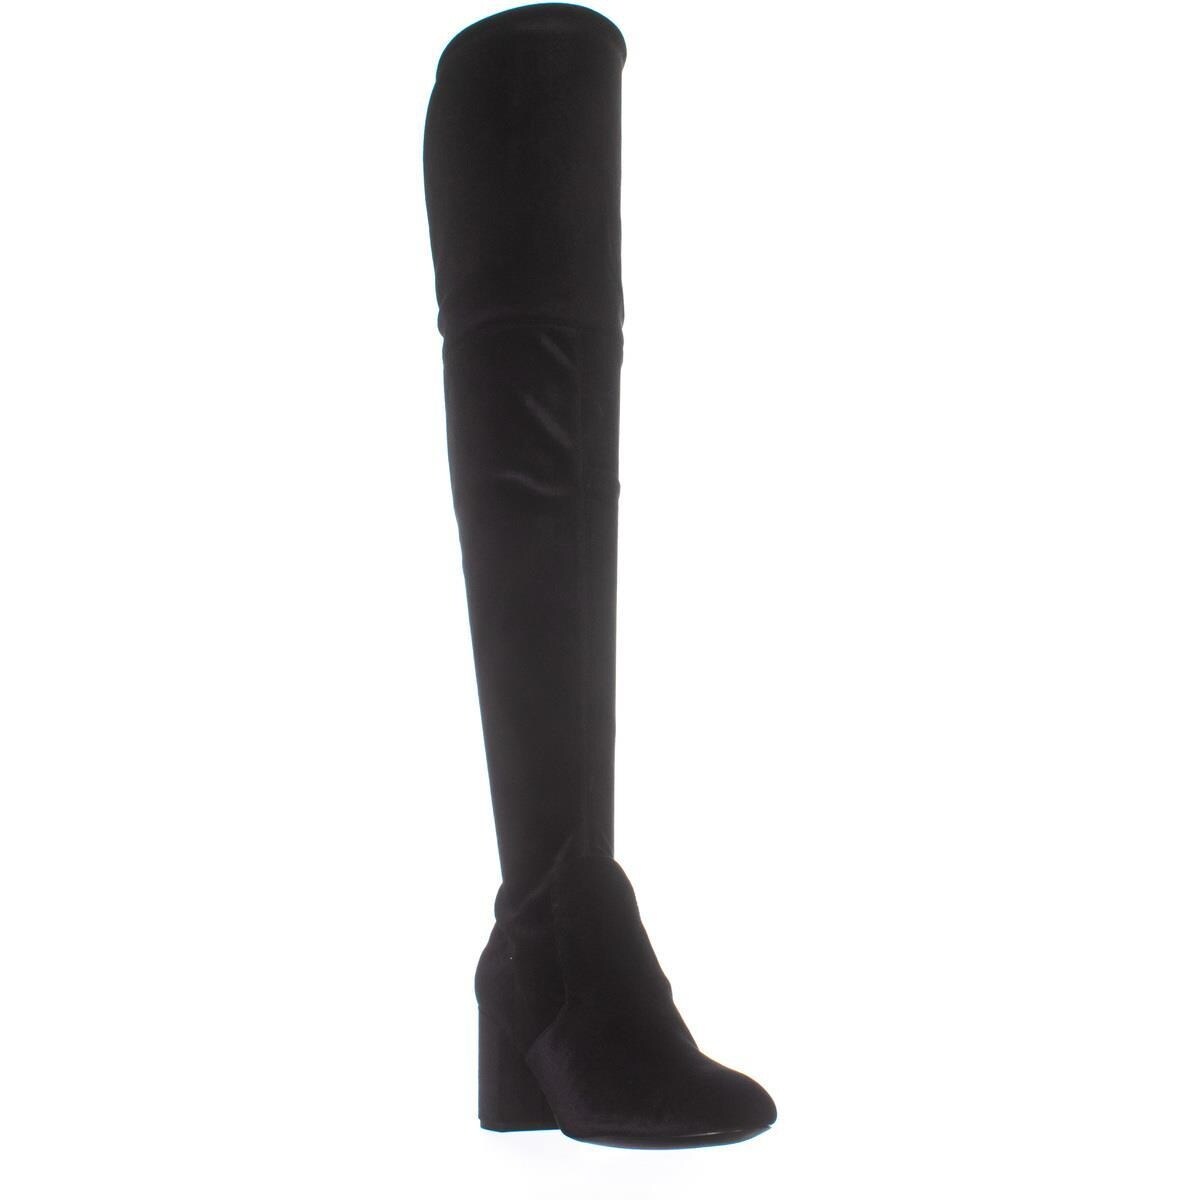 studded knee high stretch boot charles by charles david